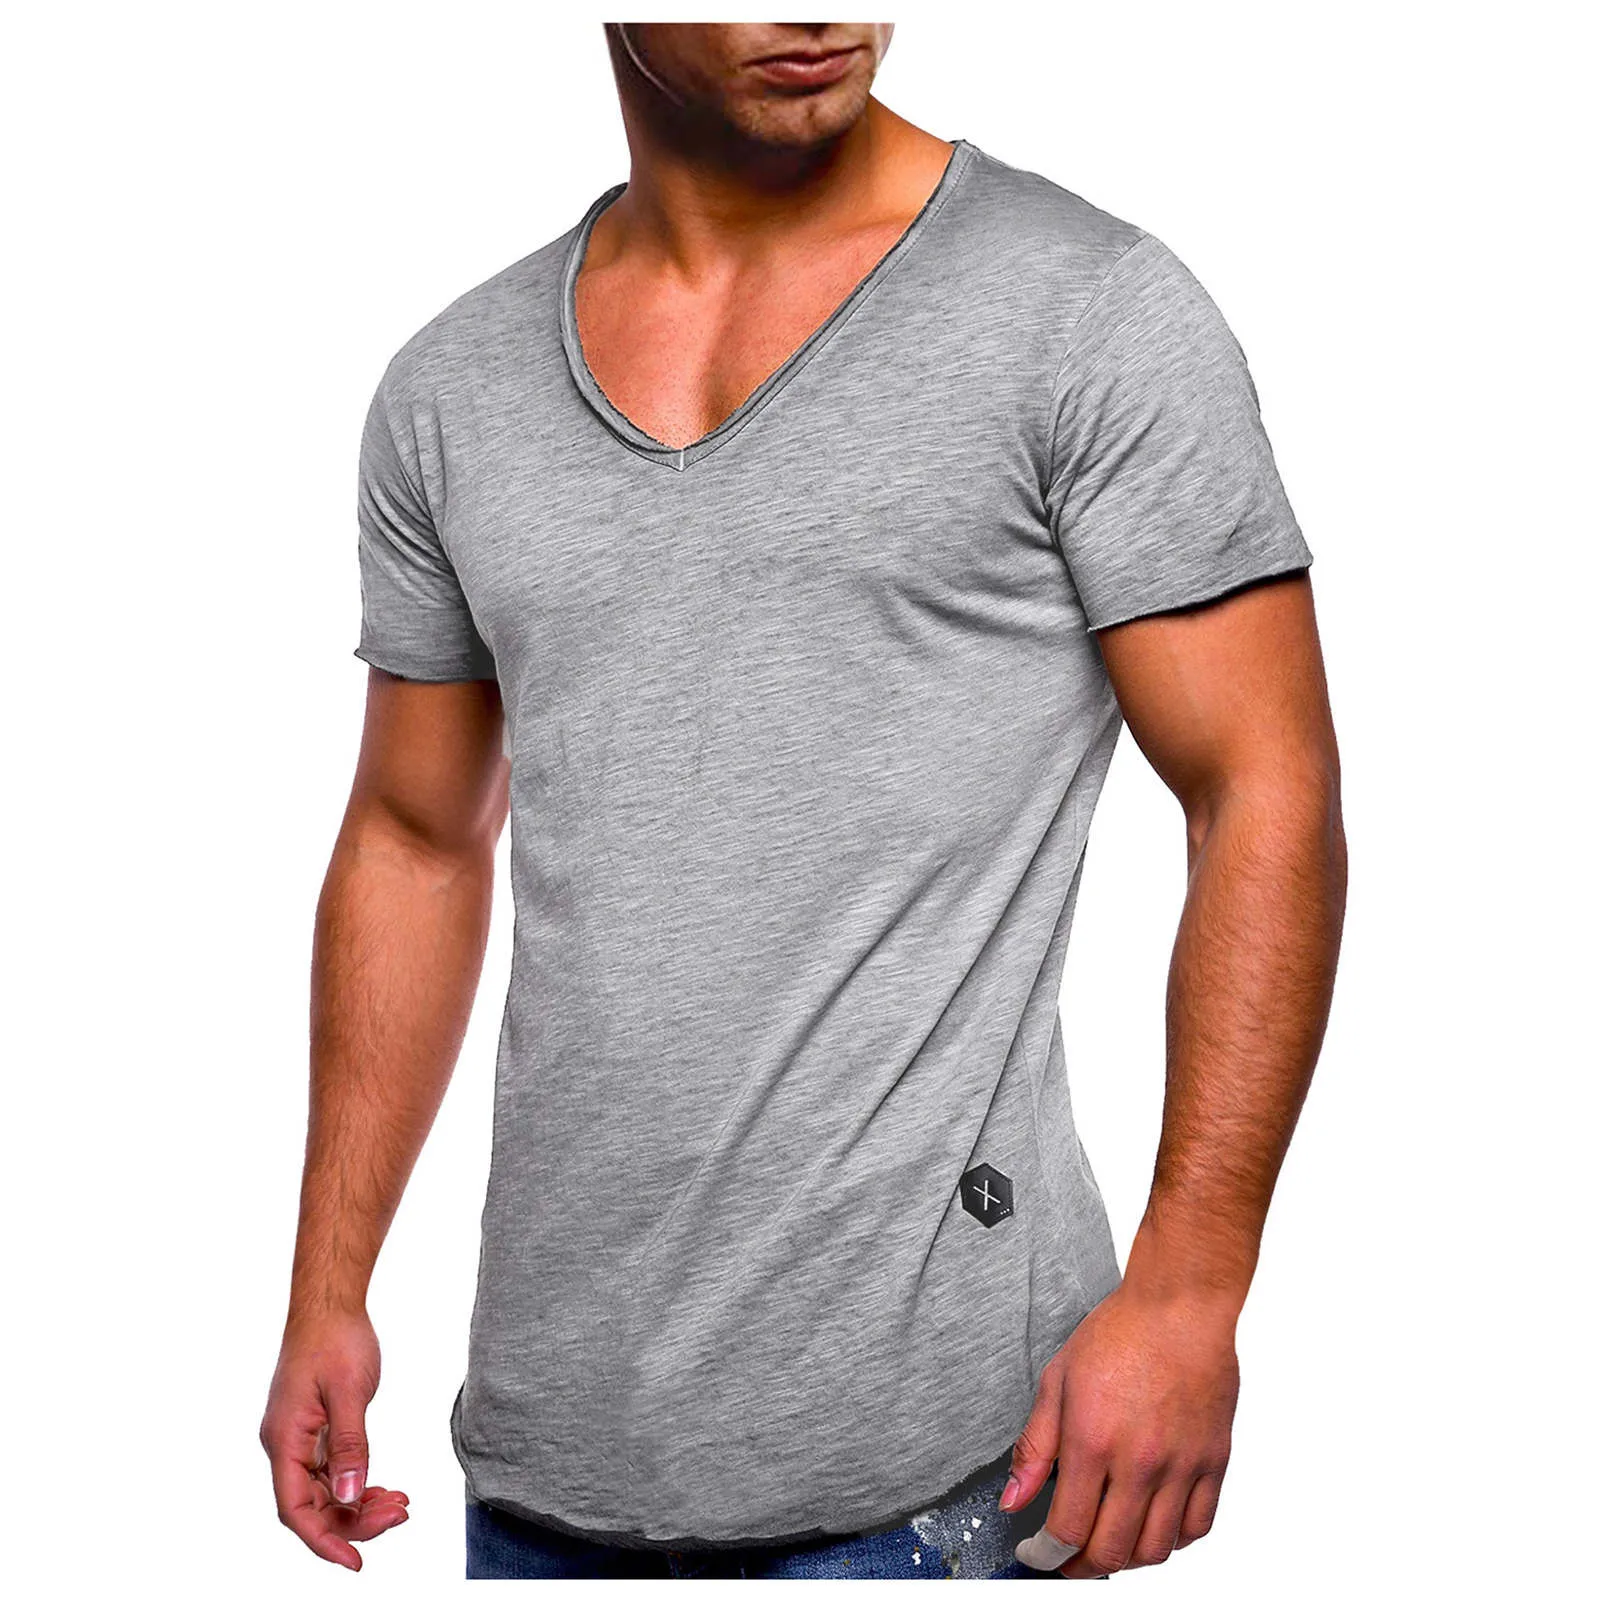 Shirt for Men F_Gotal Mens T-Shirts Fashion Summer Short Sleeve V Neck Solid Casual Sport Tees Blouse Tops 